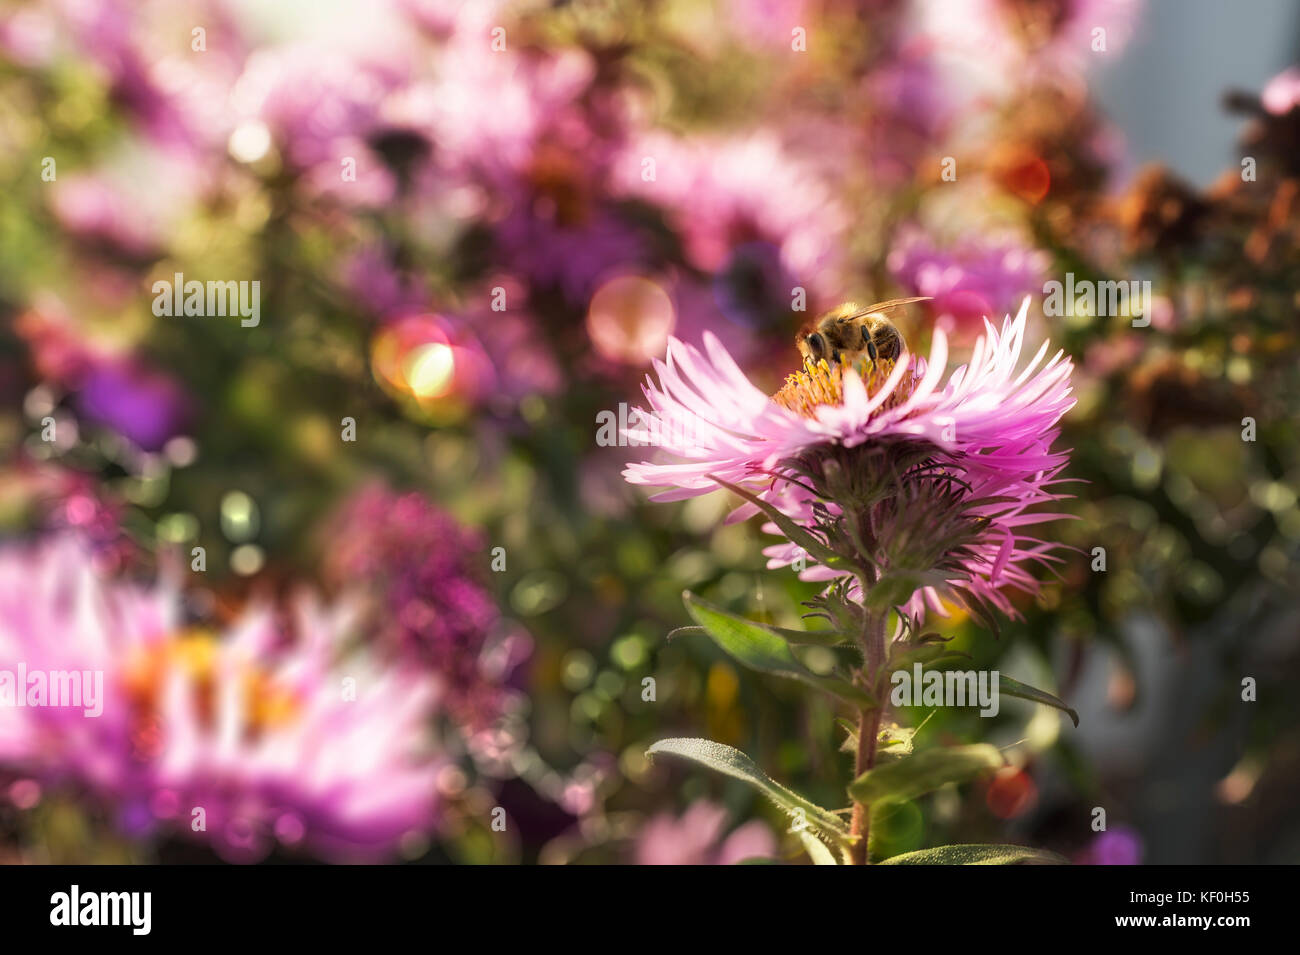 Aster in the back light with a honeybee Stock Photo